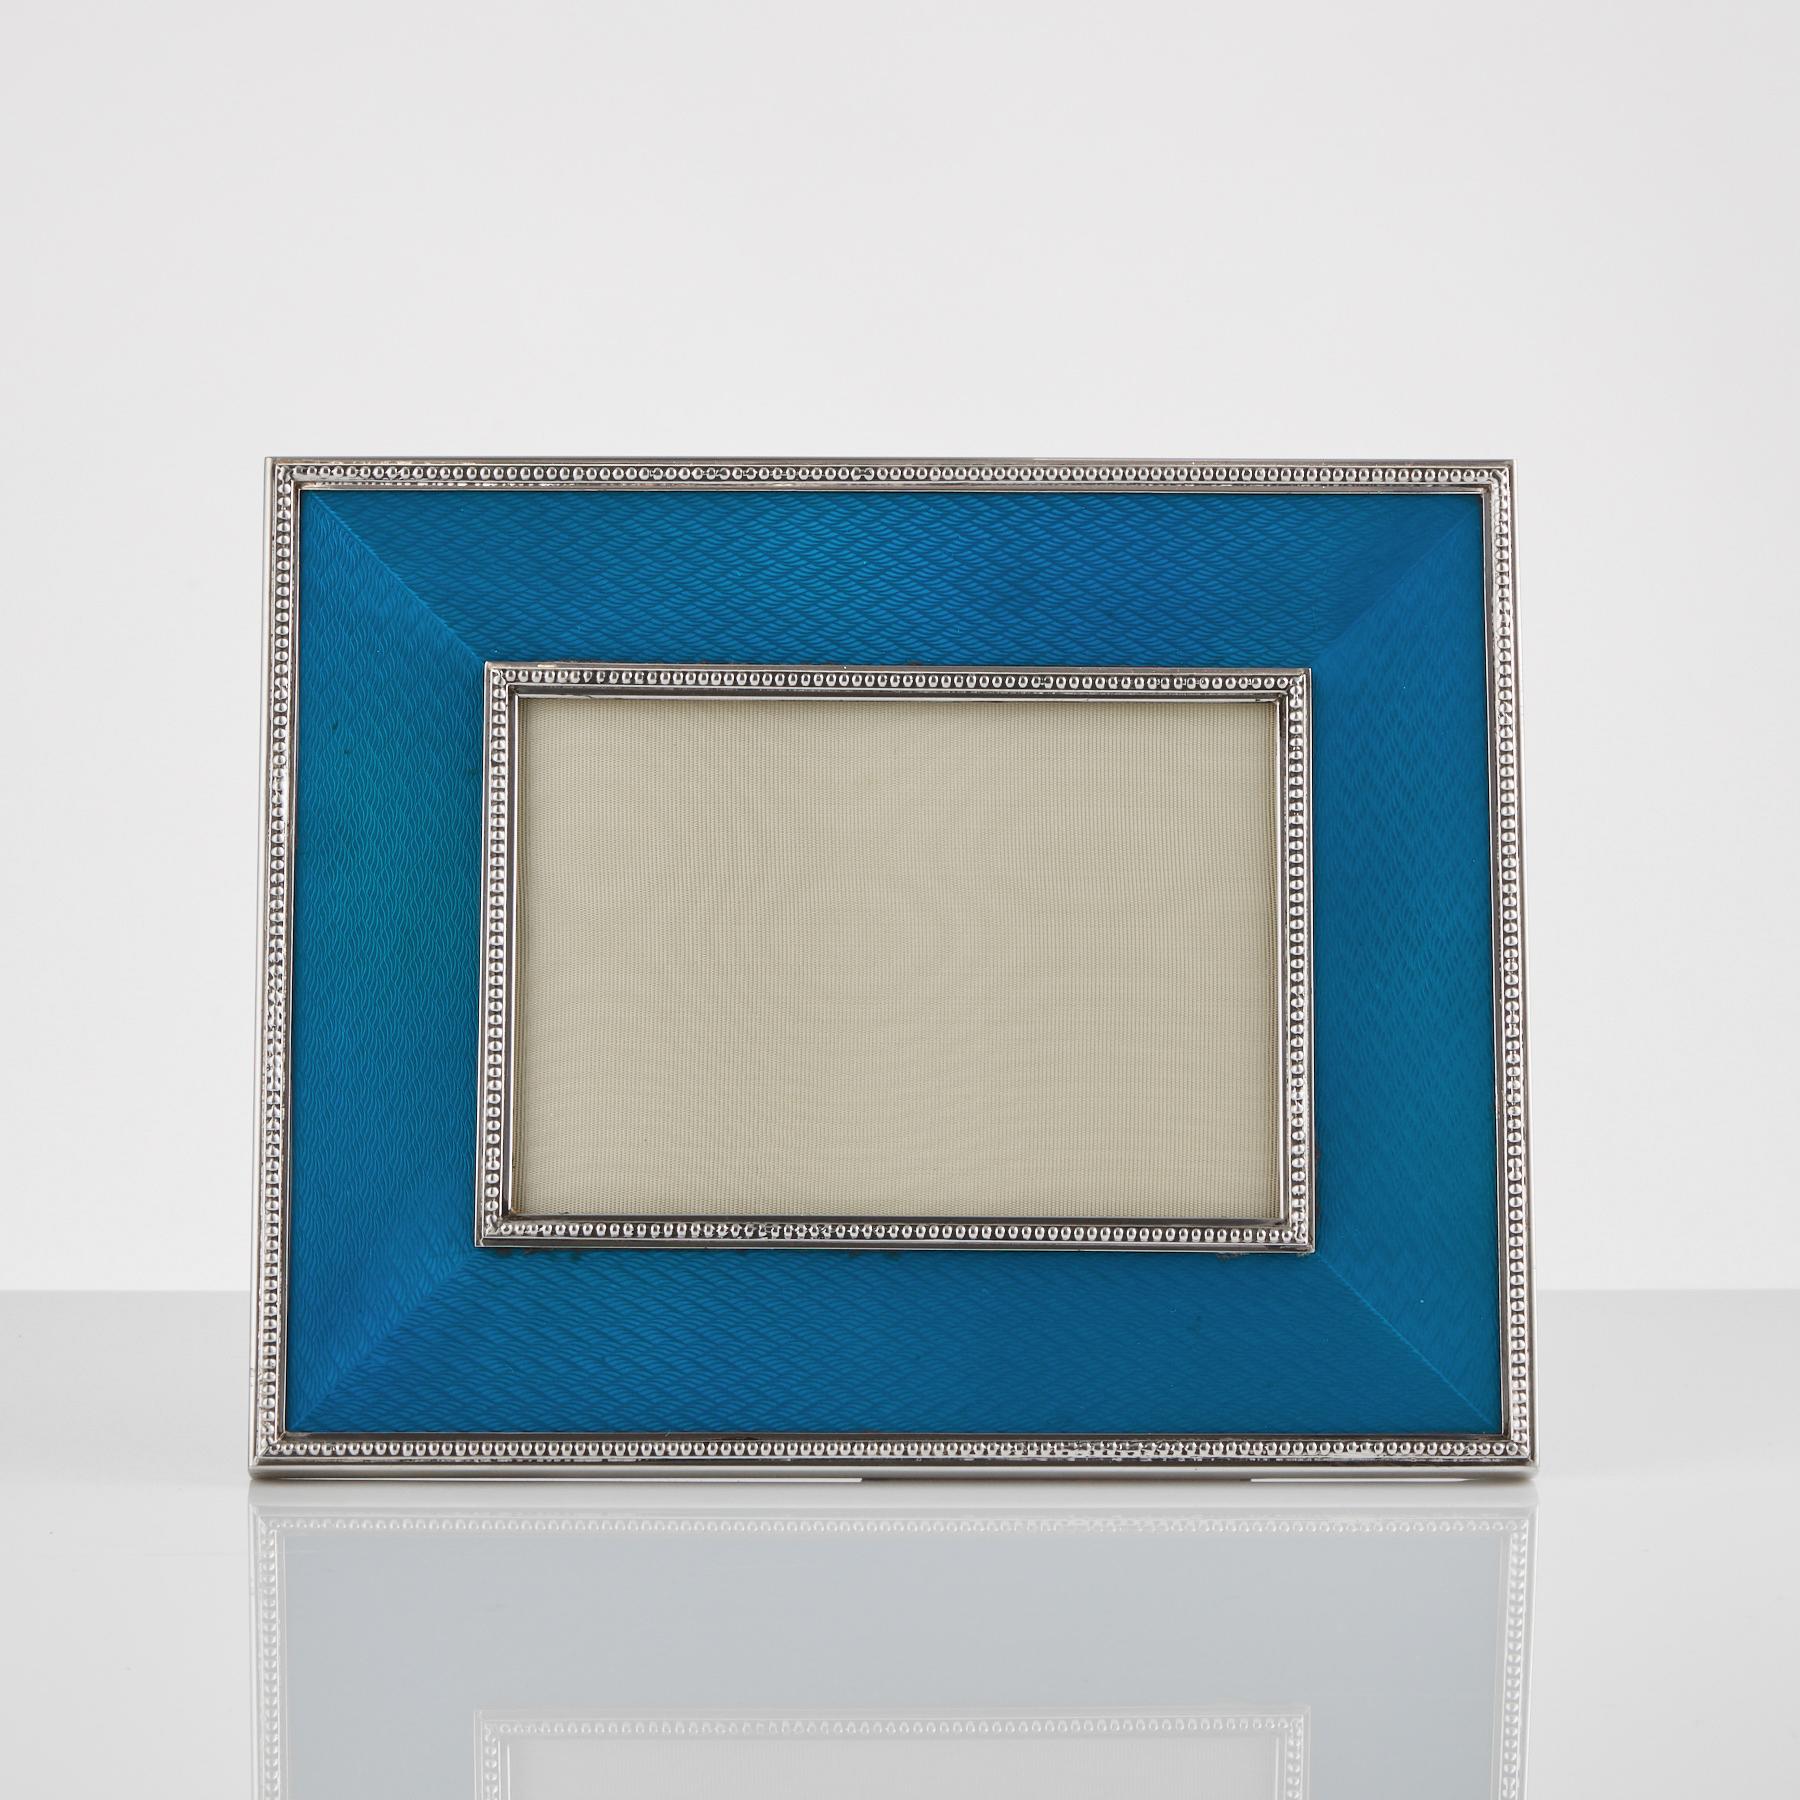 Mid-20th century silver and enamel vintage photograph frame, circa 1970
Silver markers mark Dior Italian 925
This Christian Dior quality frame is beautifully made in 925 sterling silver with beaded edge decoration.
Royal blue enamel is in good